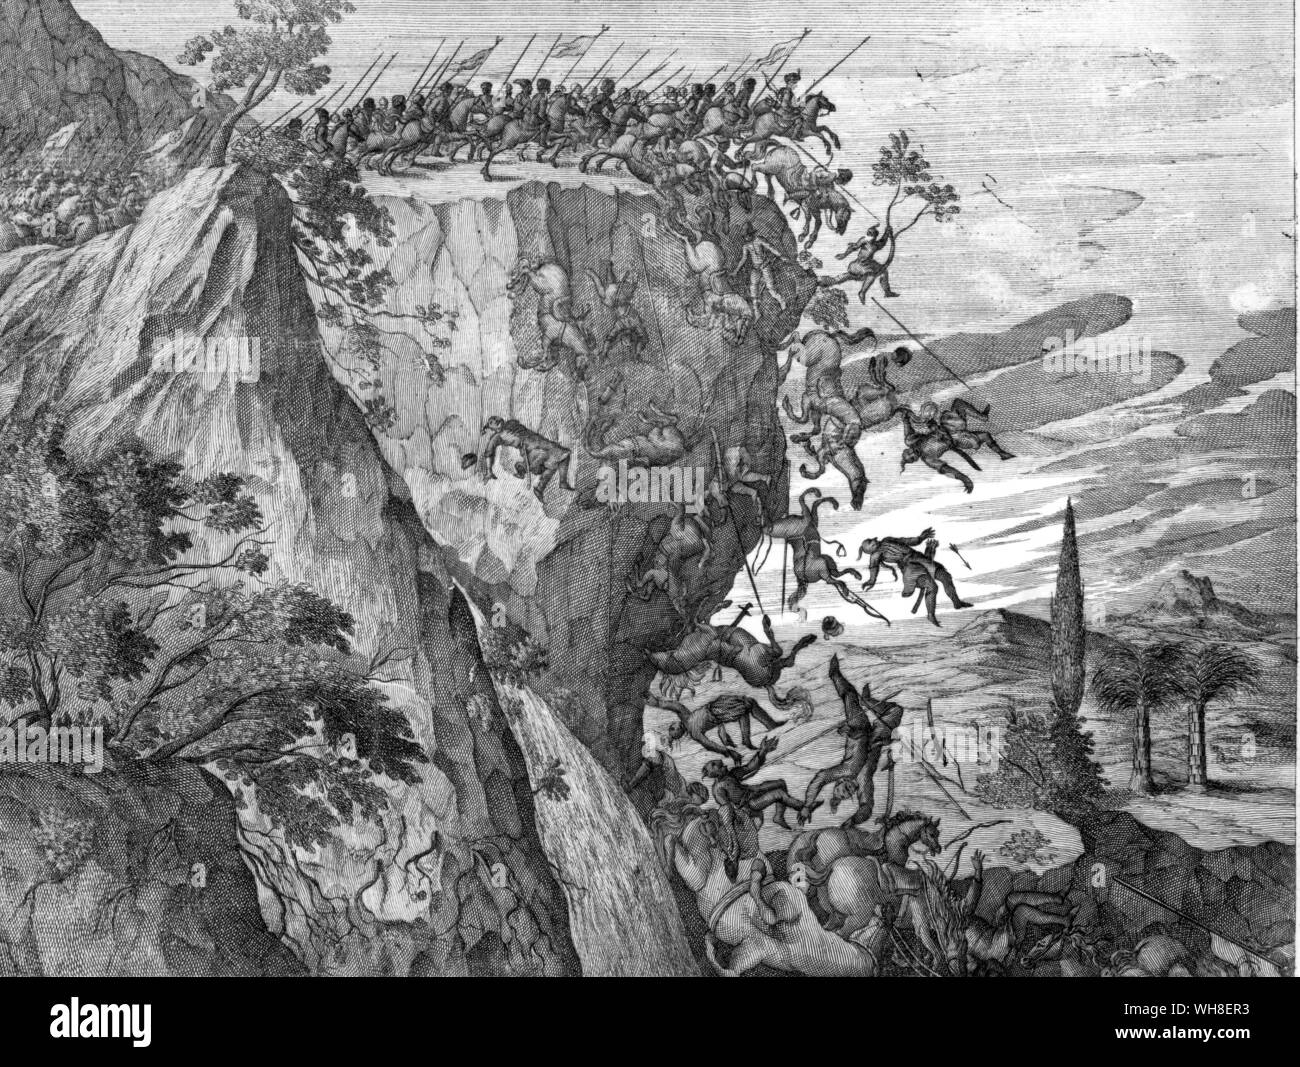 Warfare in mountainous Ethiopia - six hundred knights falling over a cliff. An illustration from a seventeenth century history of Ethiopia. Stock Photo